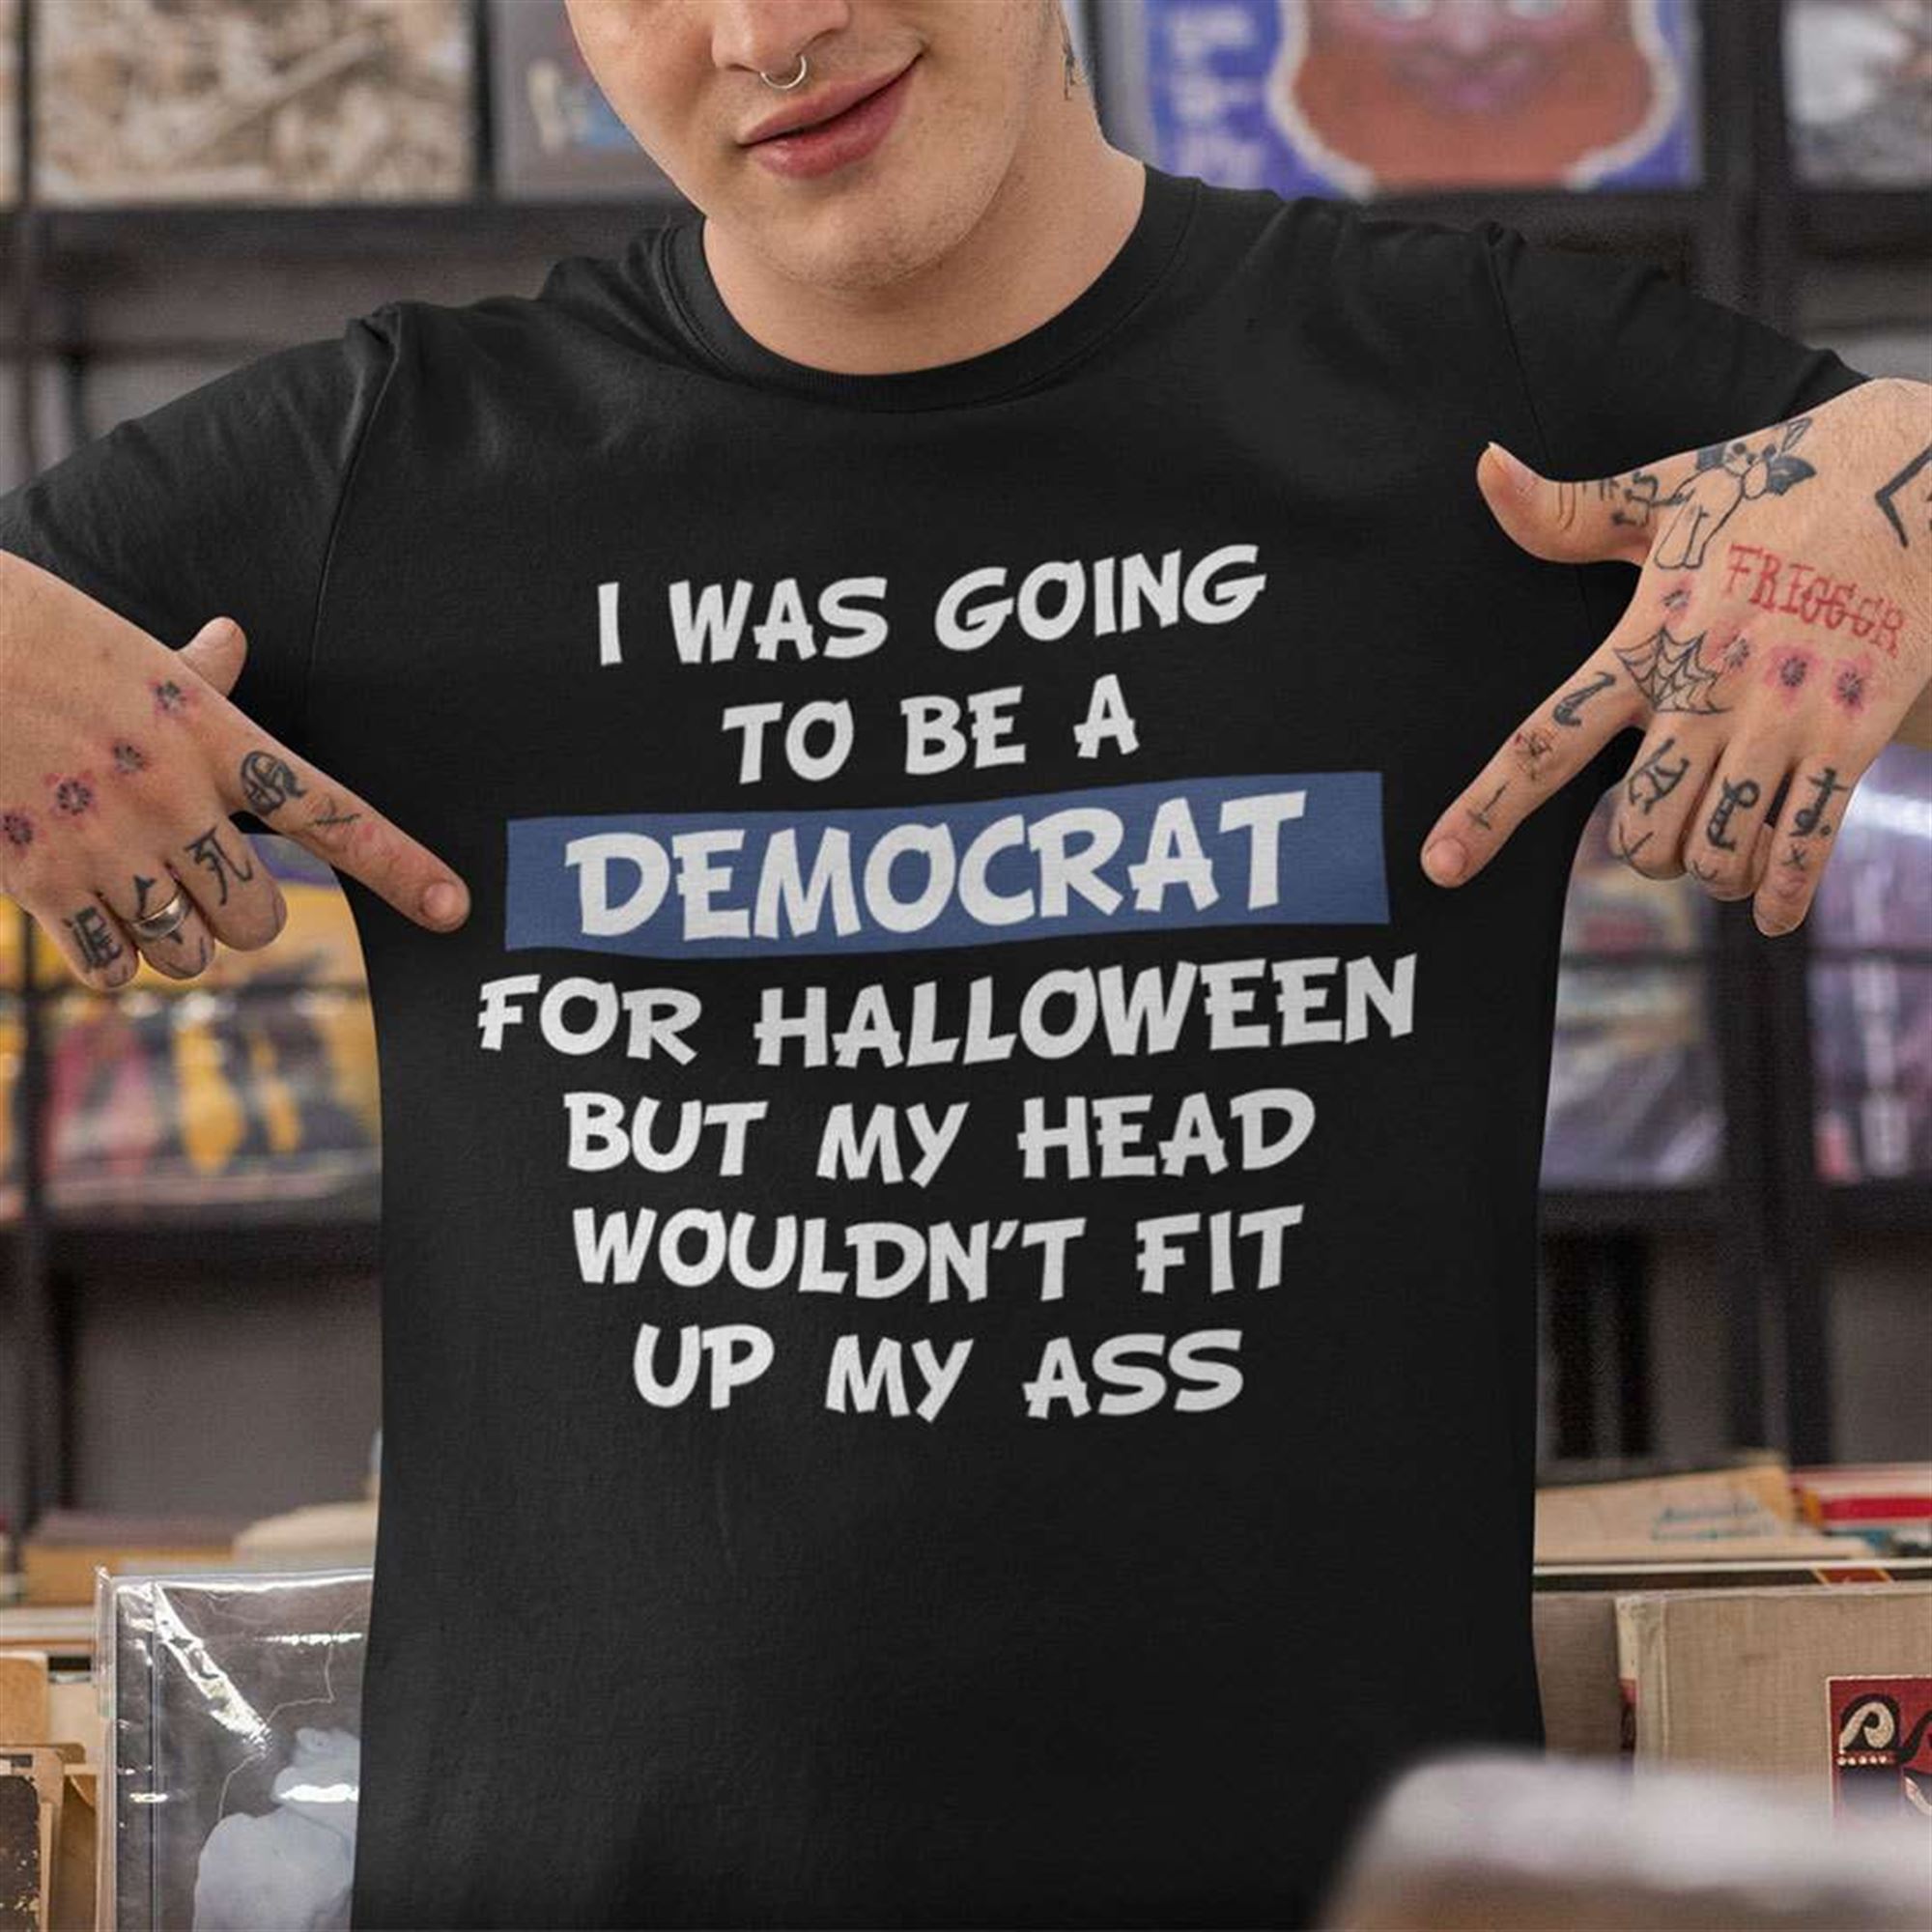 I Was Going To Be A Democrat For Halloween T-shirt Plus Size Up To 5xl